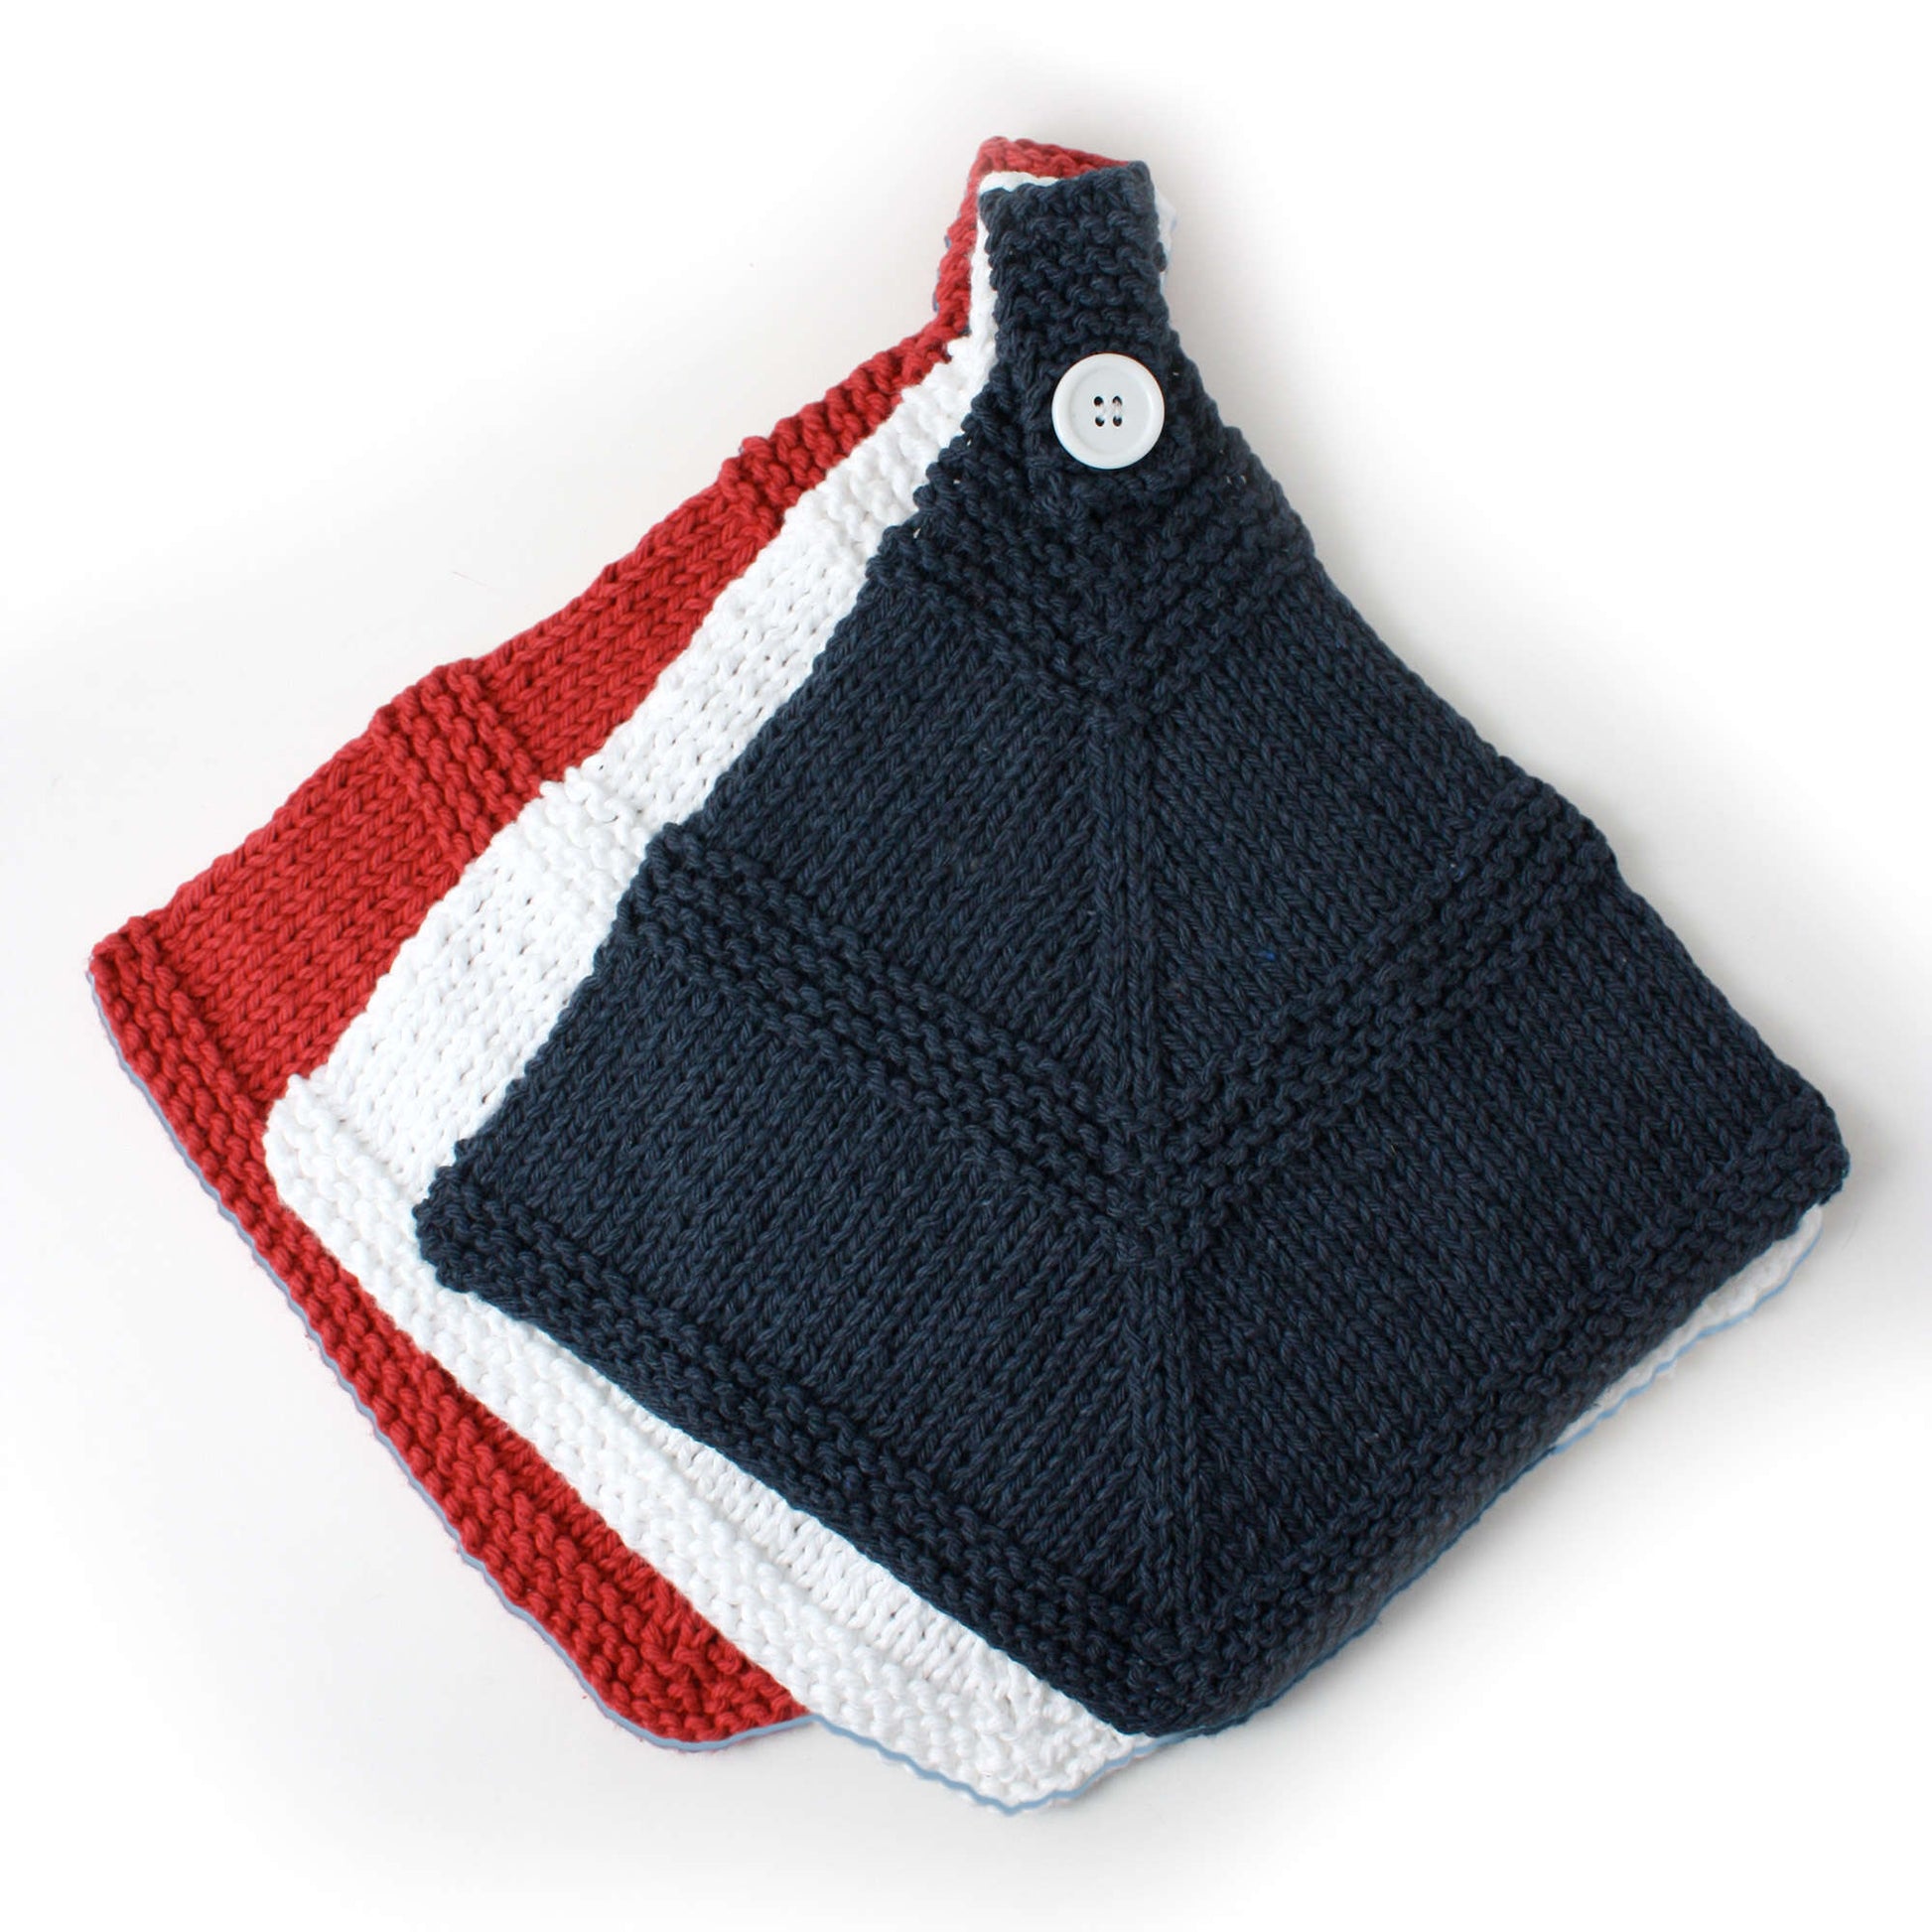 Free Lily Sugar'n Cream Red White and Blue Dishcloth Knit Pattern